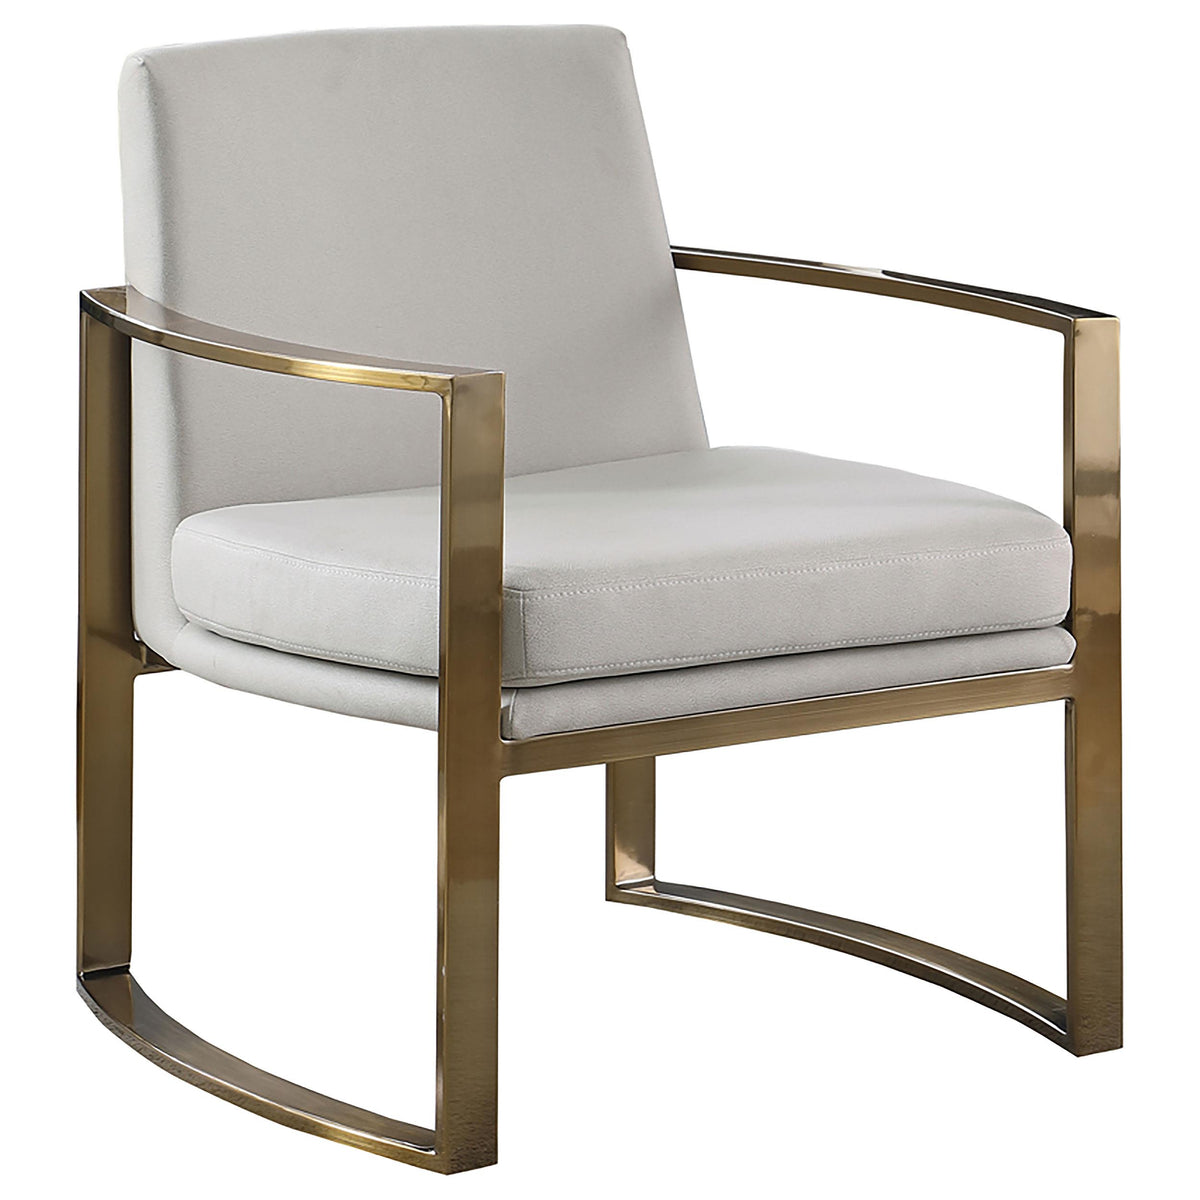 Cory Concave Metal Arm Accent Chair Cream and Bronze Cory Concave Metal Arm Accent Chair Cream and Bronze Half Price Furniture